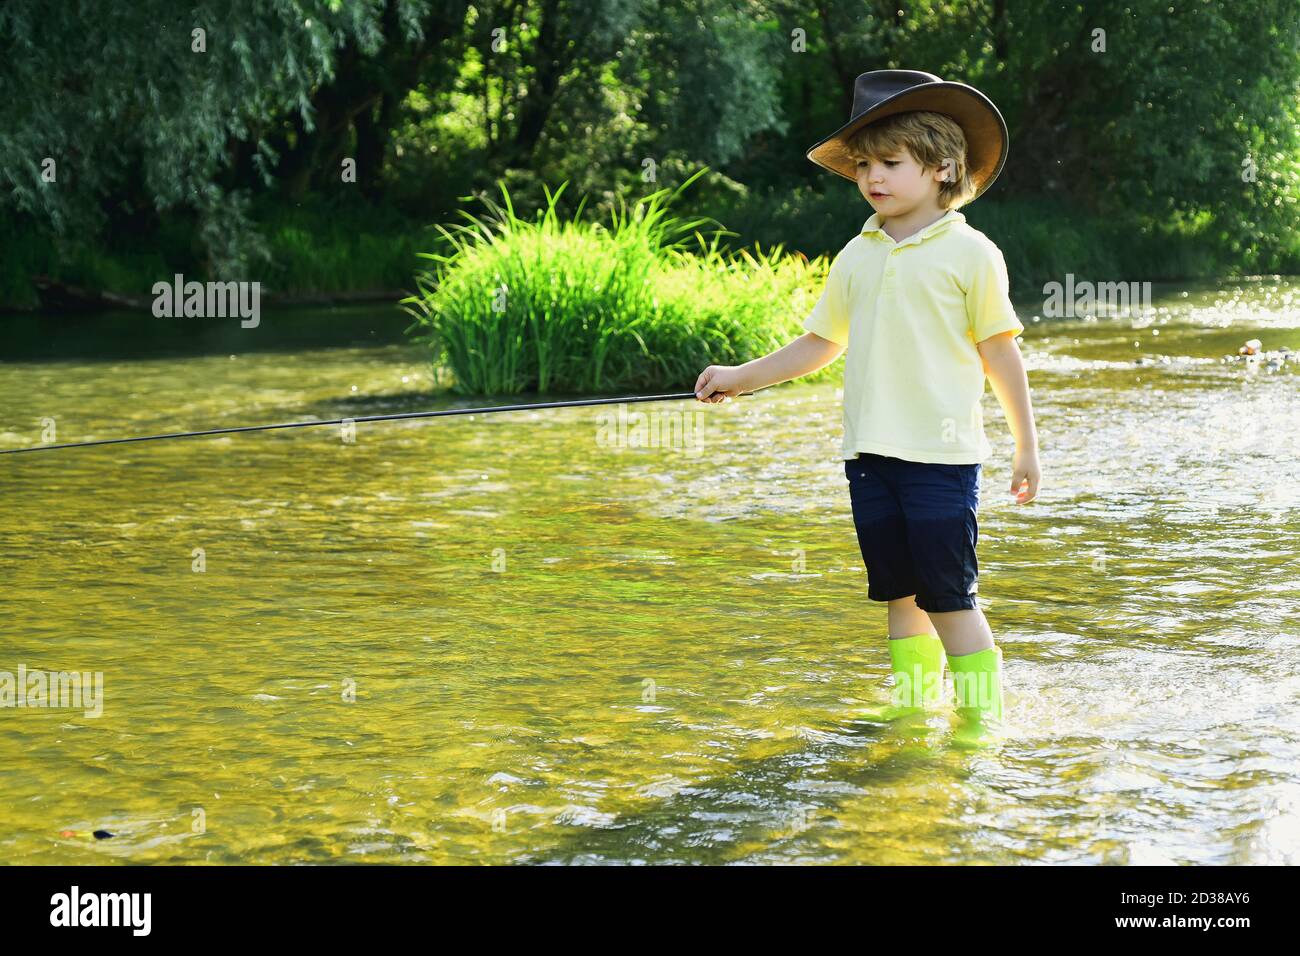 Young boy fishing in a forest river. Boy in yellow shirt with a